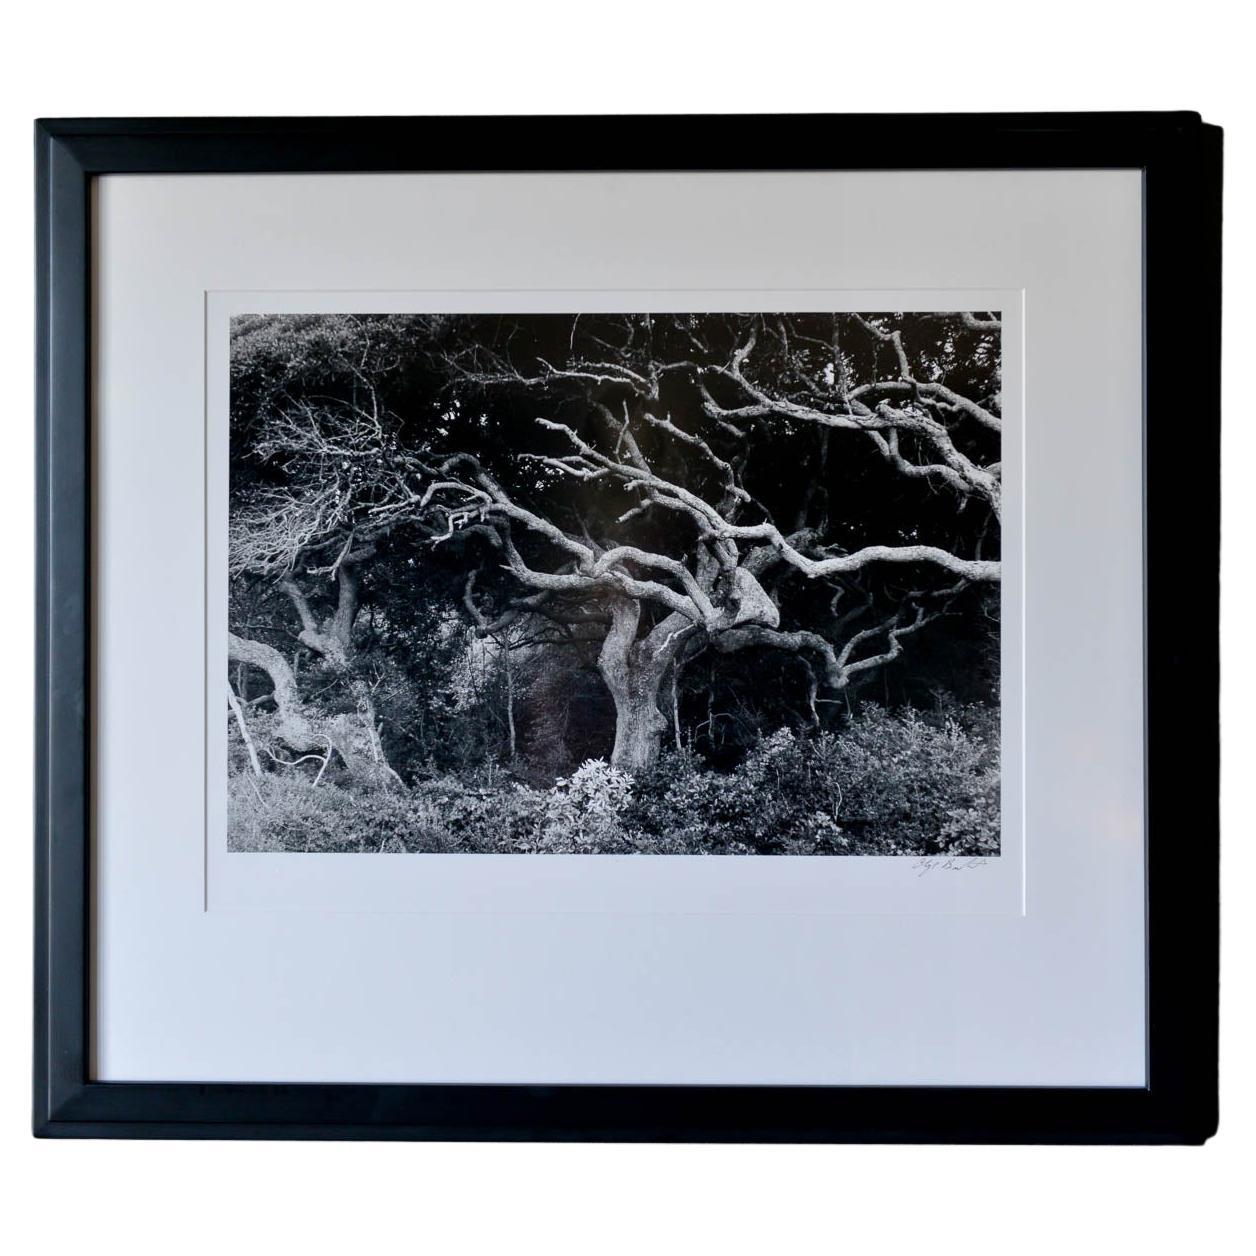 Original Silver Gelatin Photograph titled "Amelia Island" by Clyde Butcher, 1989